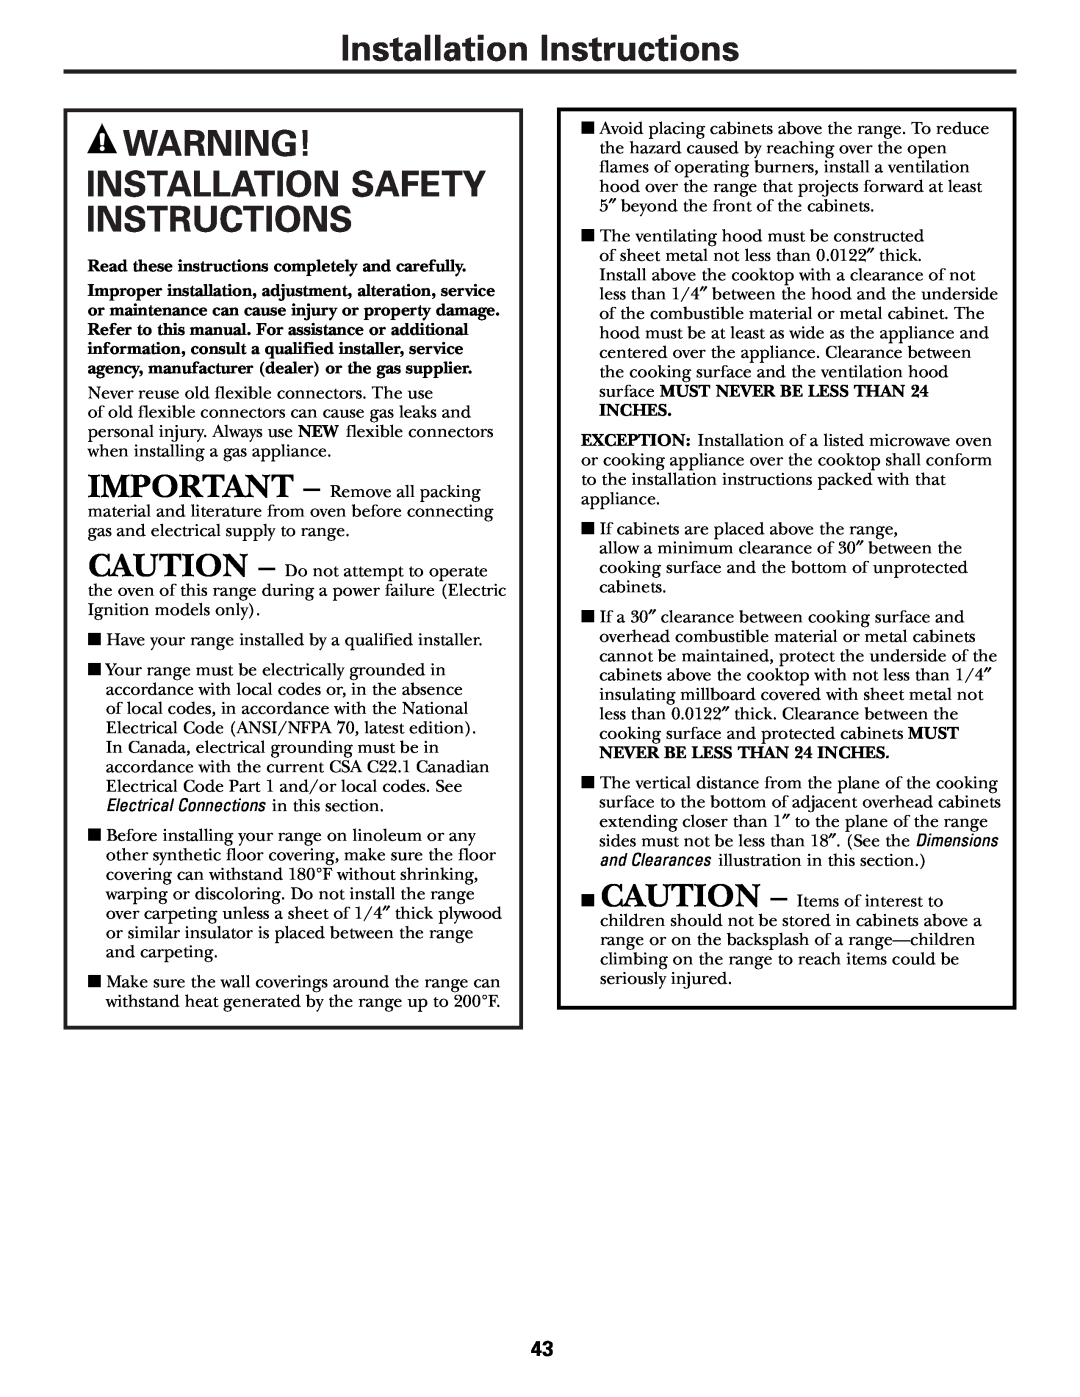 Mabe Canada JGBP86 Installation Instructions, Installation Safety Instructions, Electrical Connections in this section 